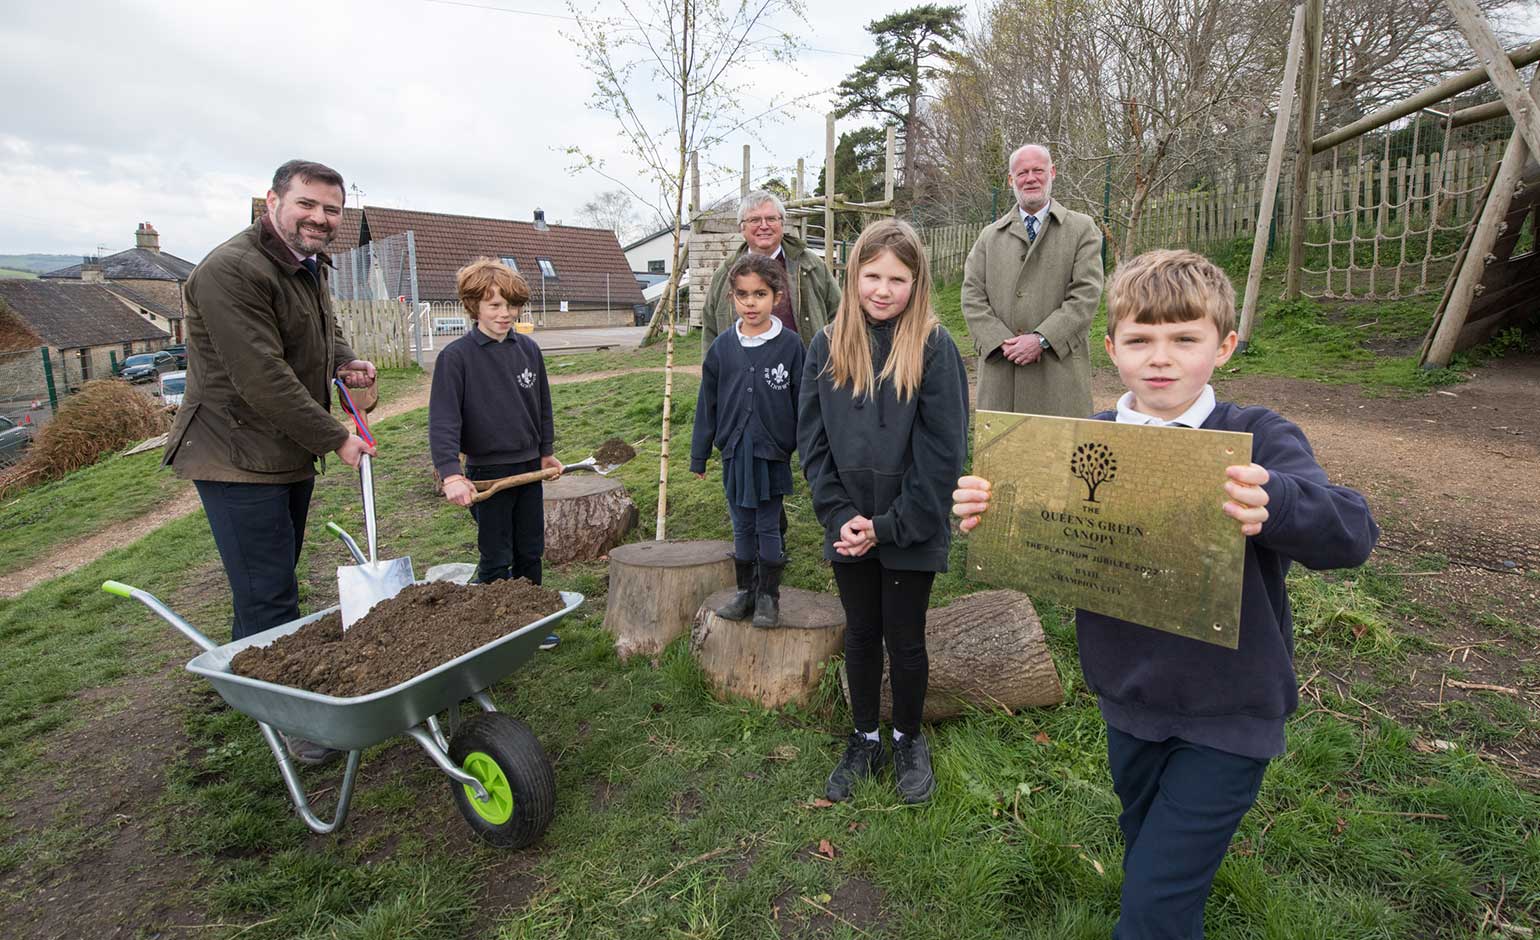 Bath awarded Champion City status for tree planting efforts to mark jubilee 